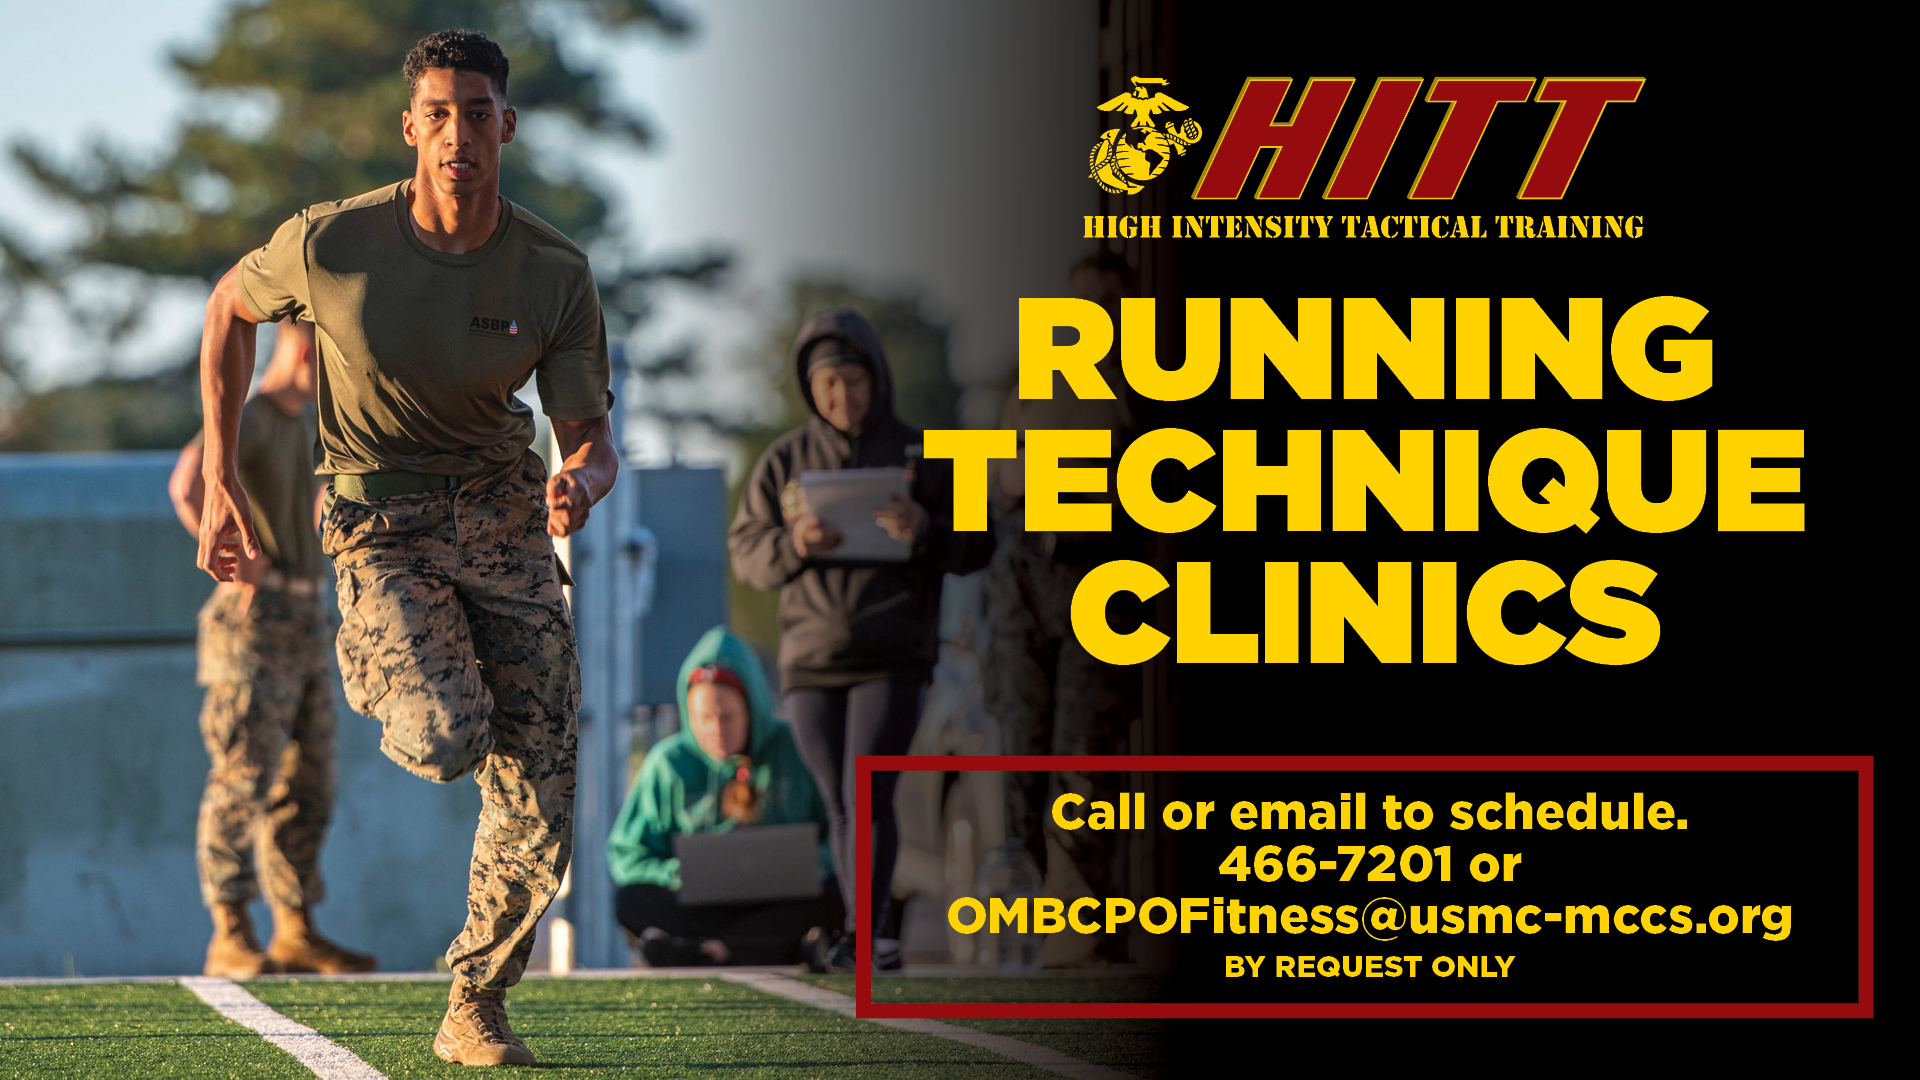 High Intensity Tactical Training